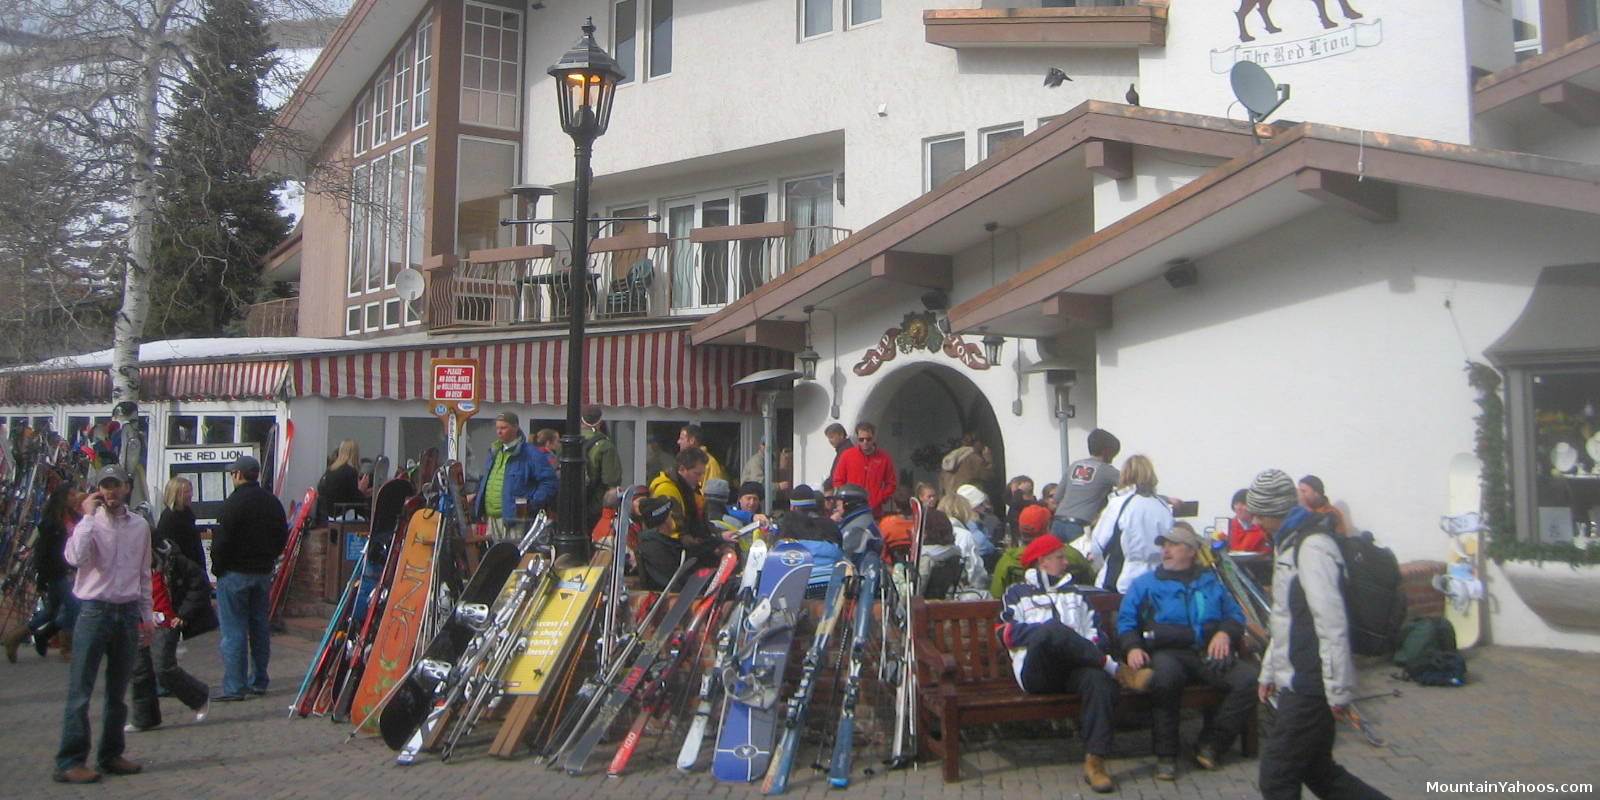 Vail apres ski at the Red Lion - top image